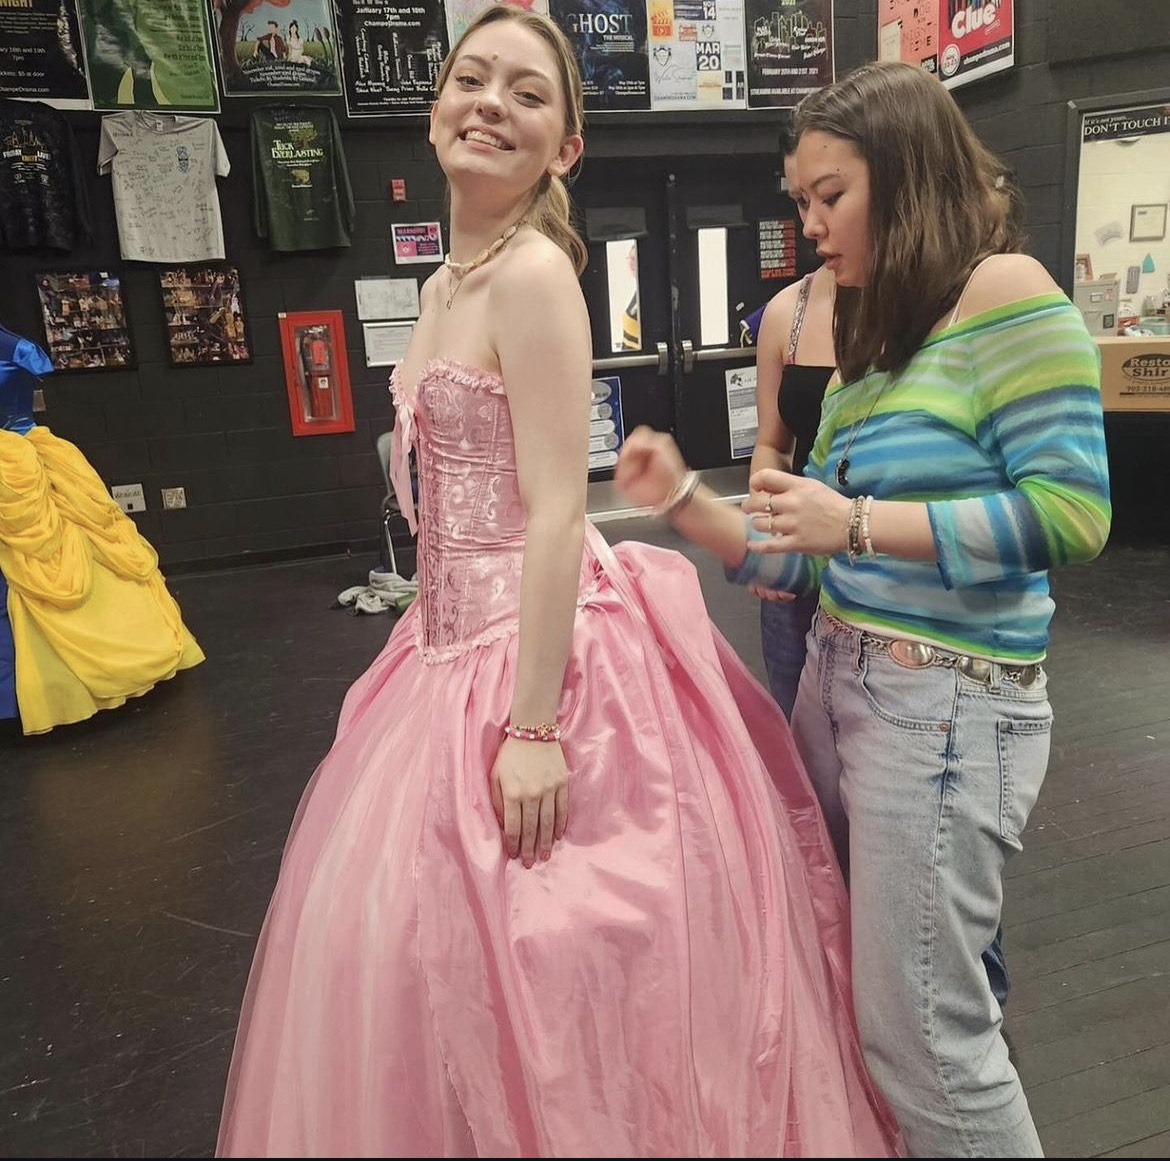 Karina Ebersole fitting the final costume for the play